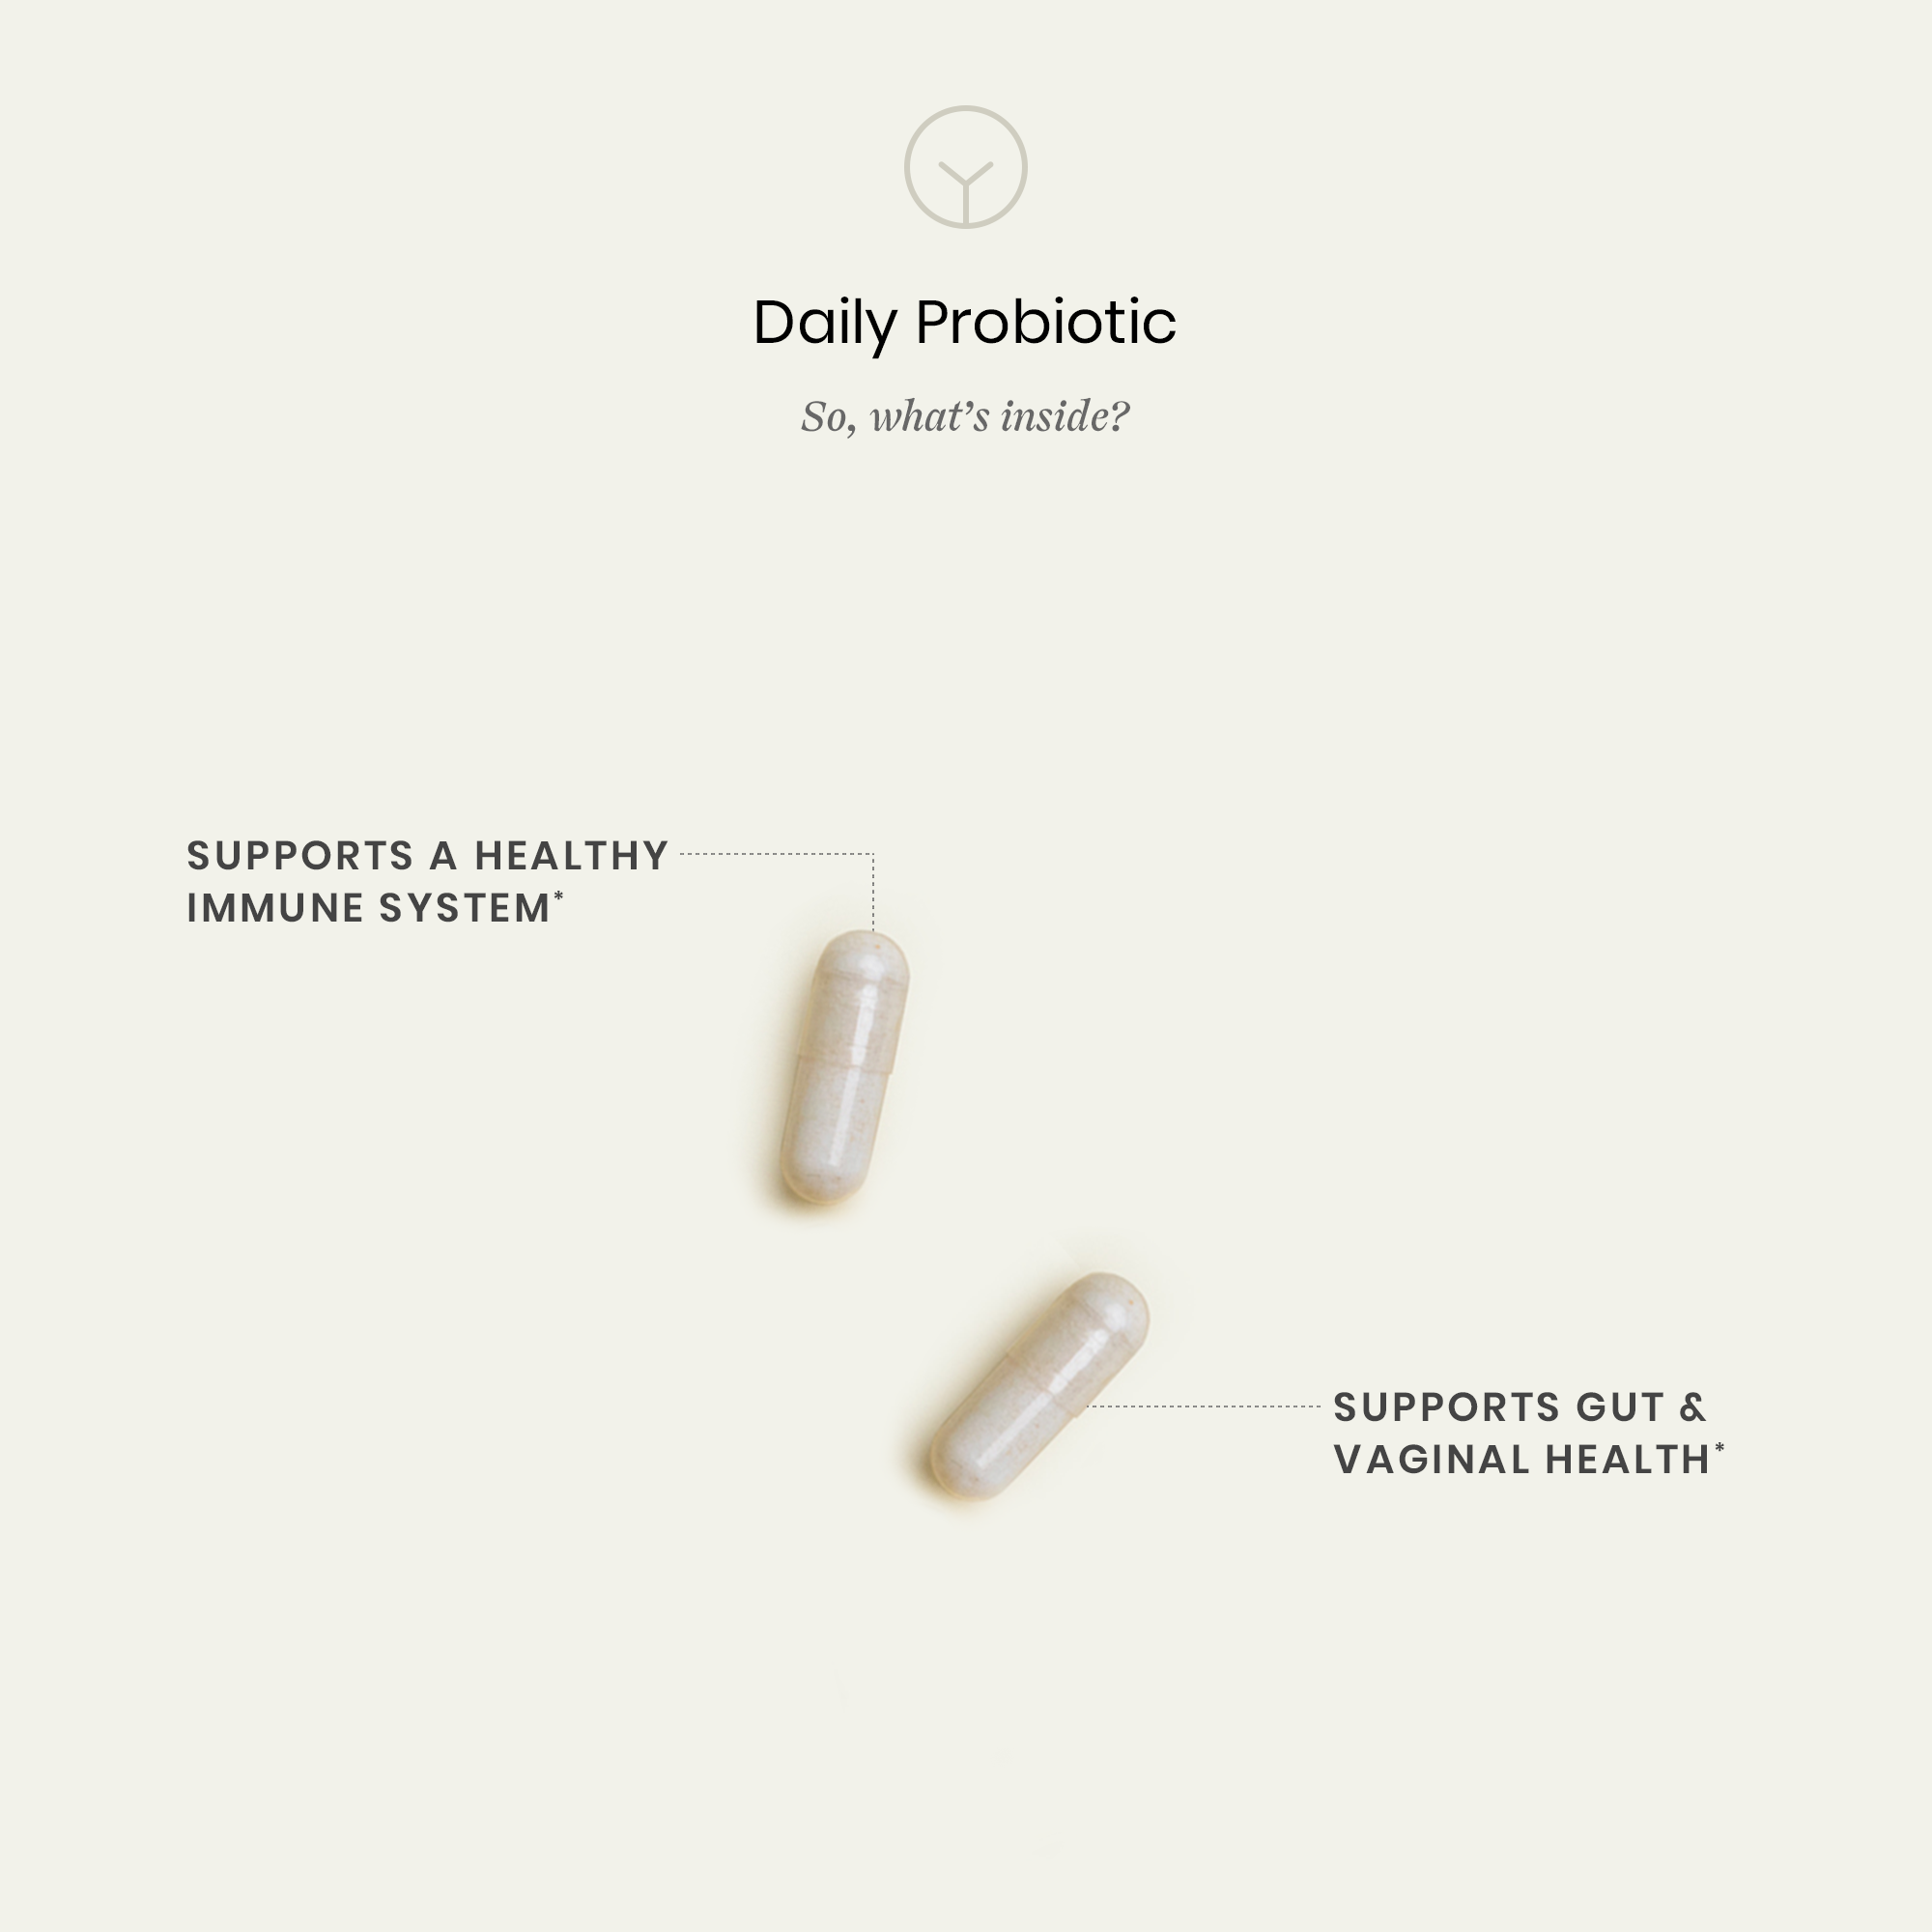 Daily Probiotic  Ingredients and Benefits